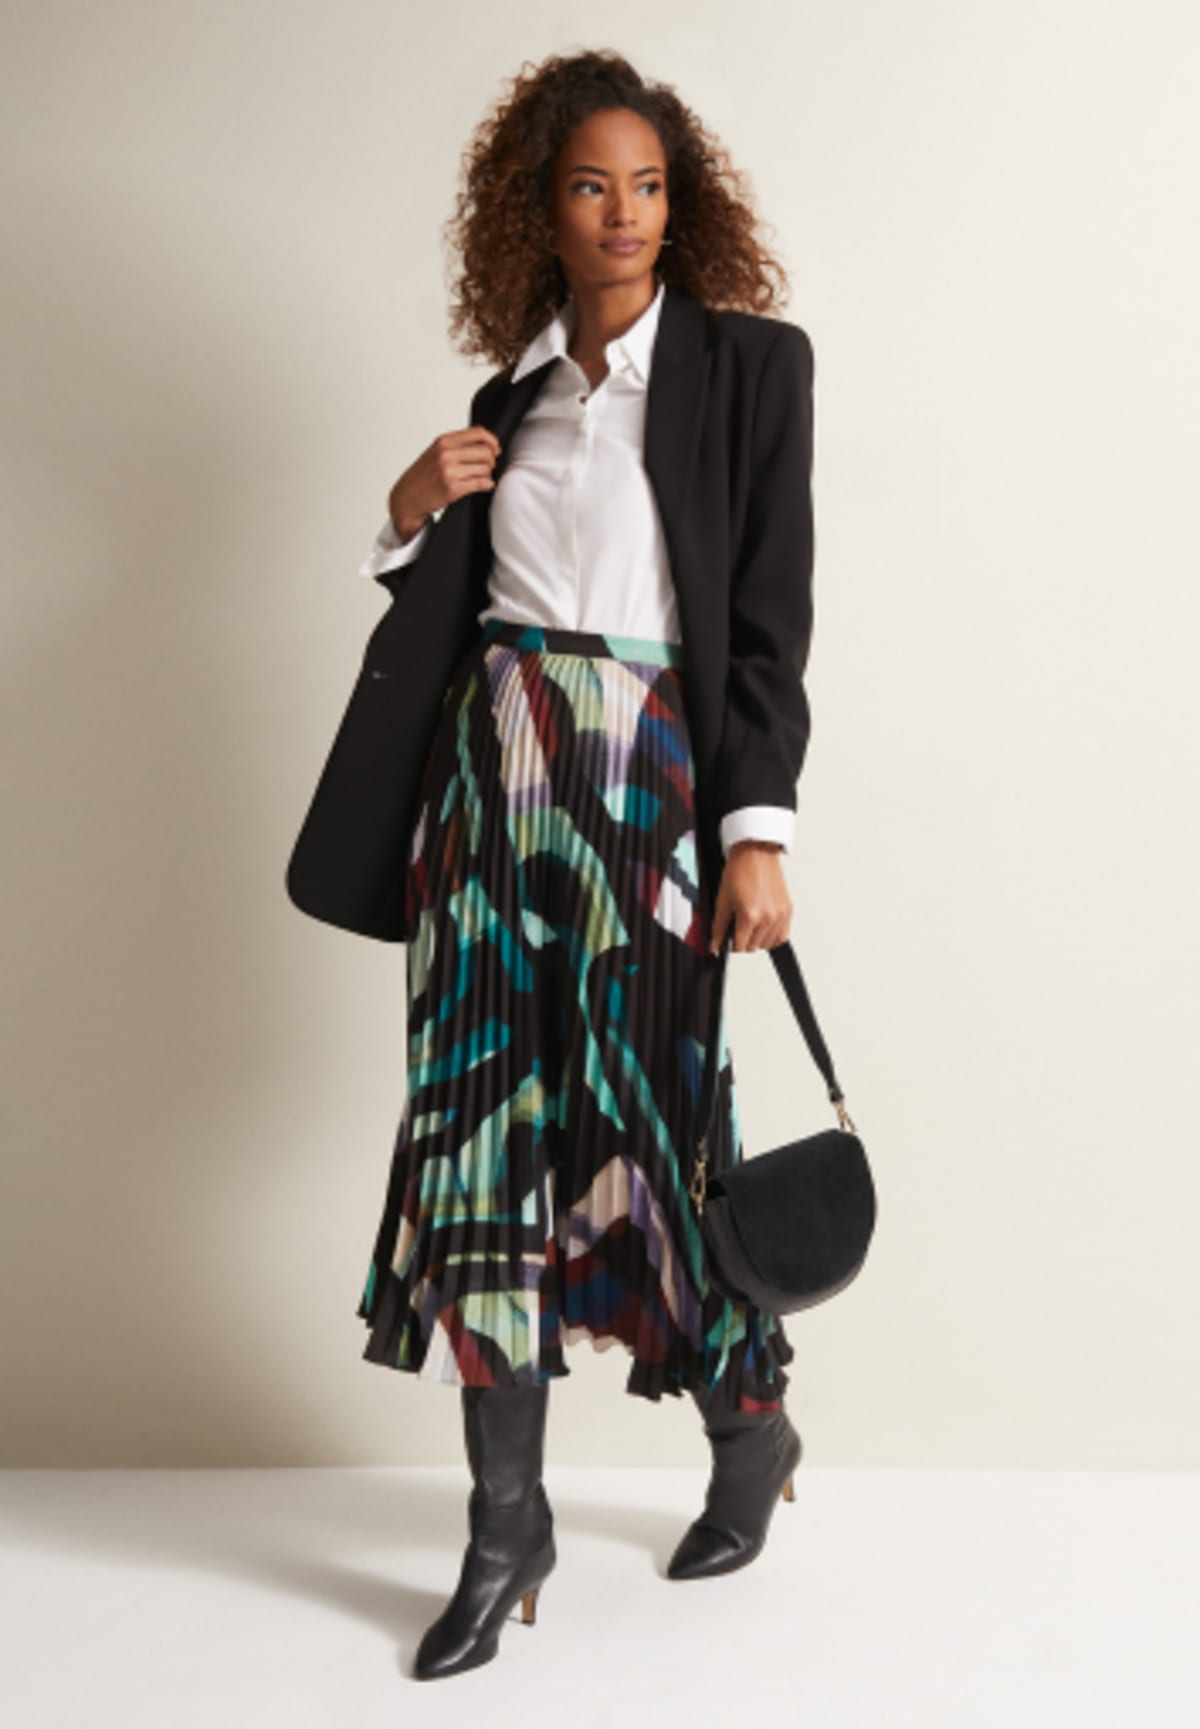 Woman in Phase Eight printed skirt, black blazer and white shirt